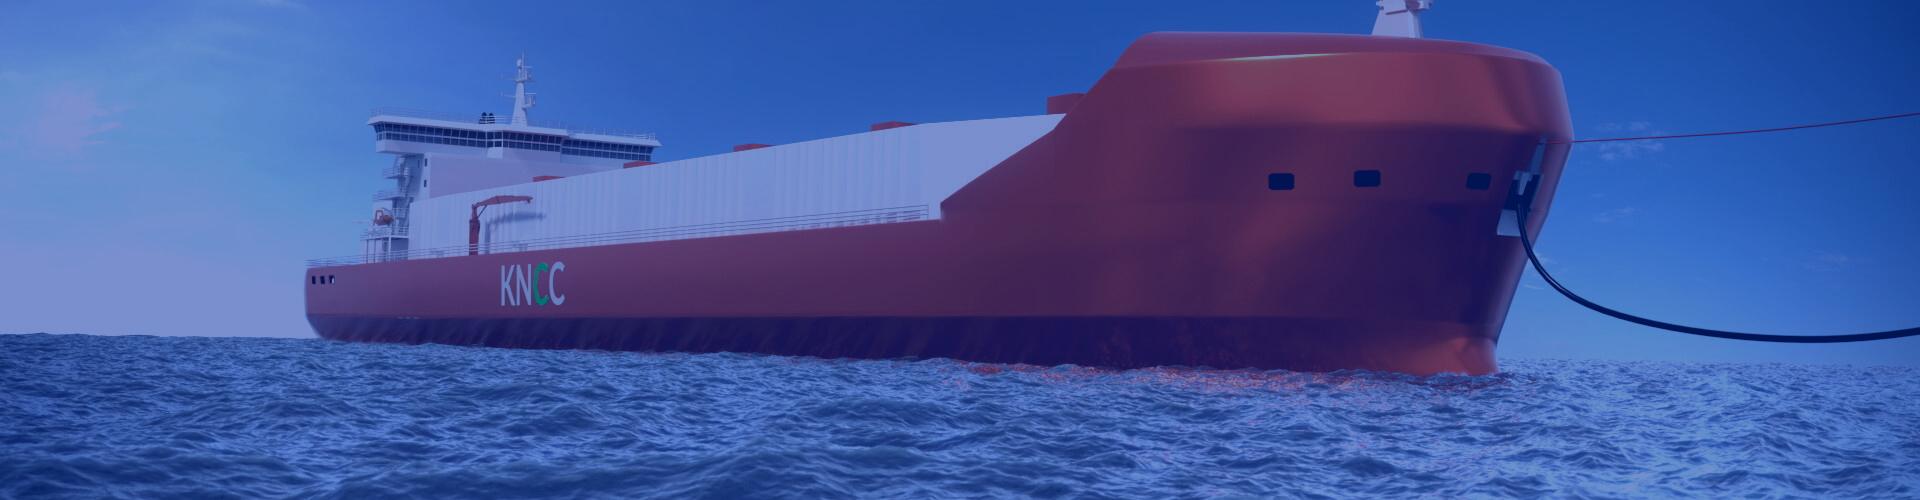 Product Knutsen NYK Carbon Carriers - Knutsen image